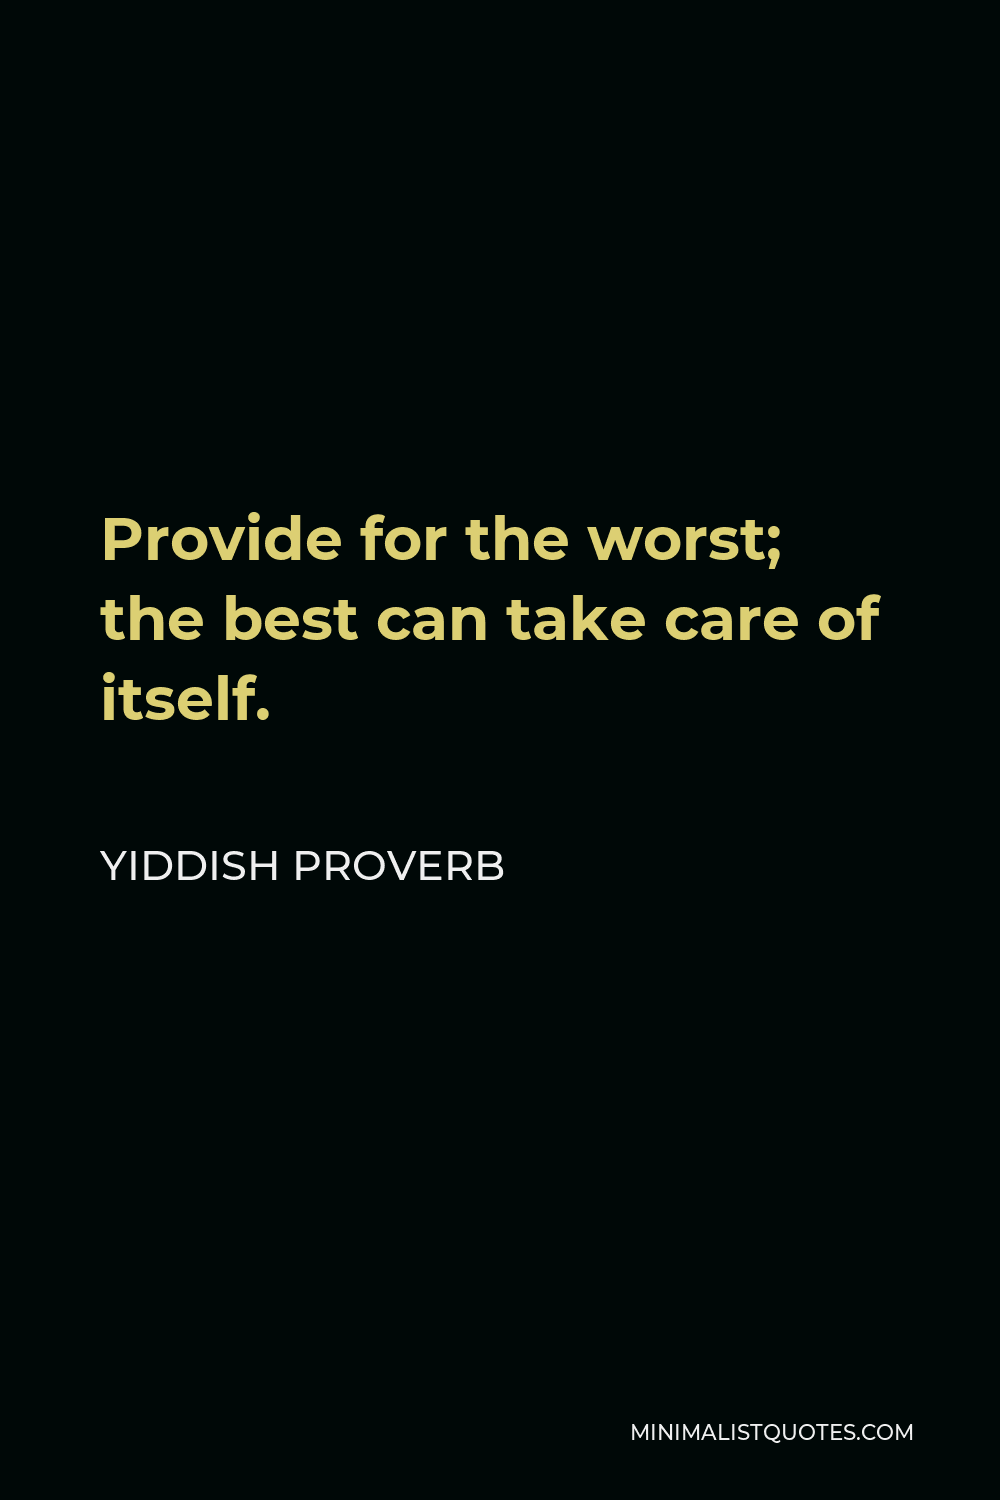 Yiddish Proverb Quote - Provide for the worst; the best can take care of itself.